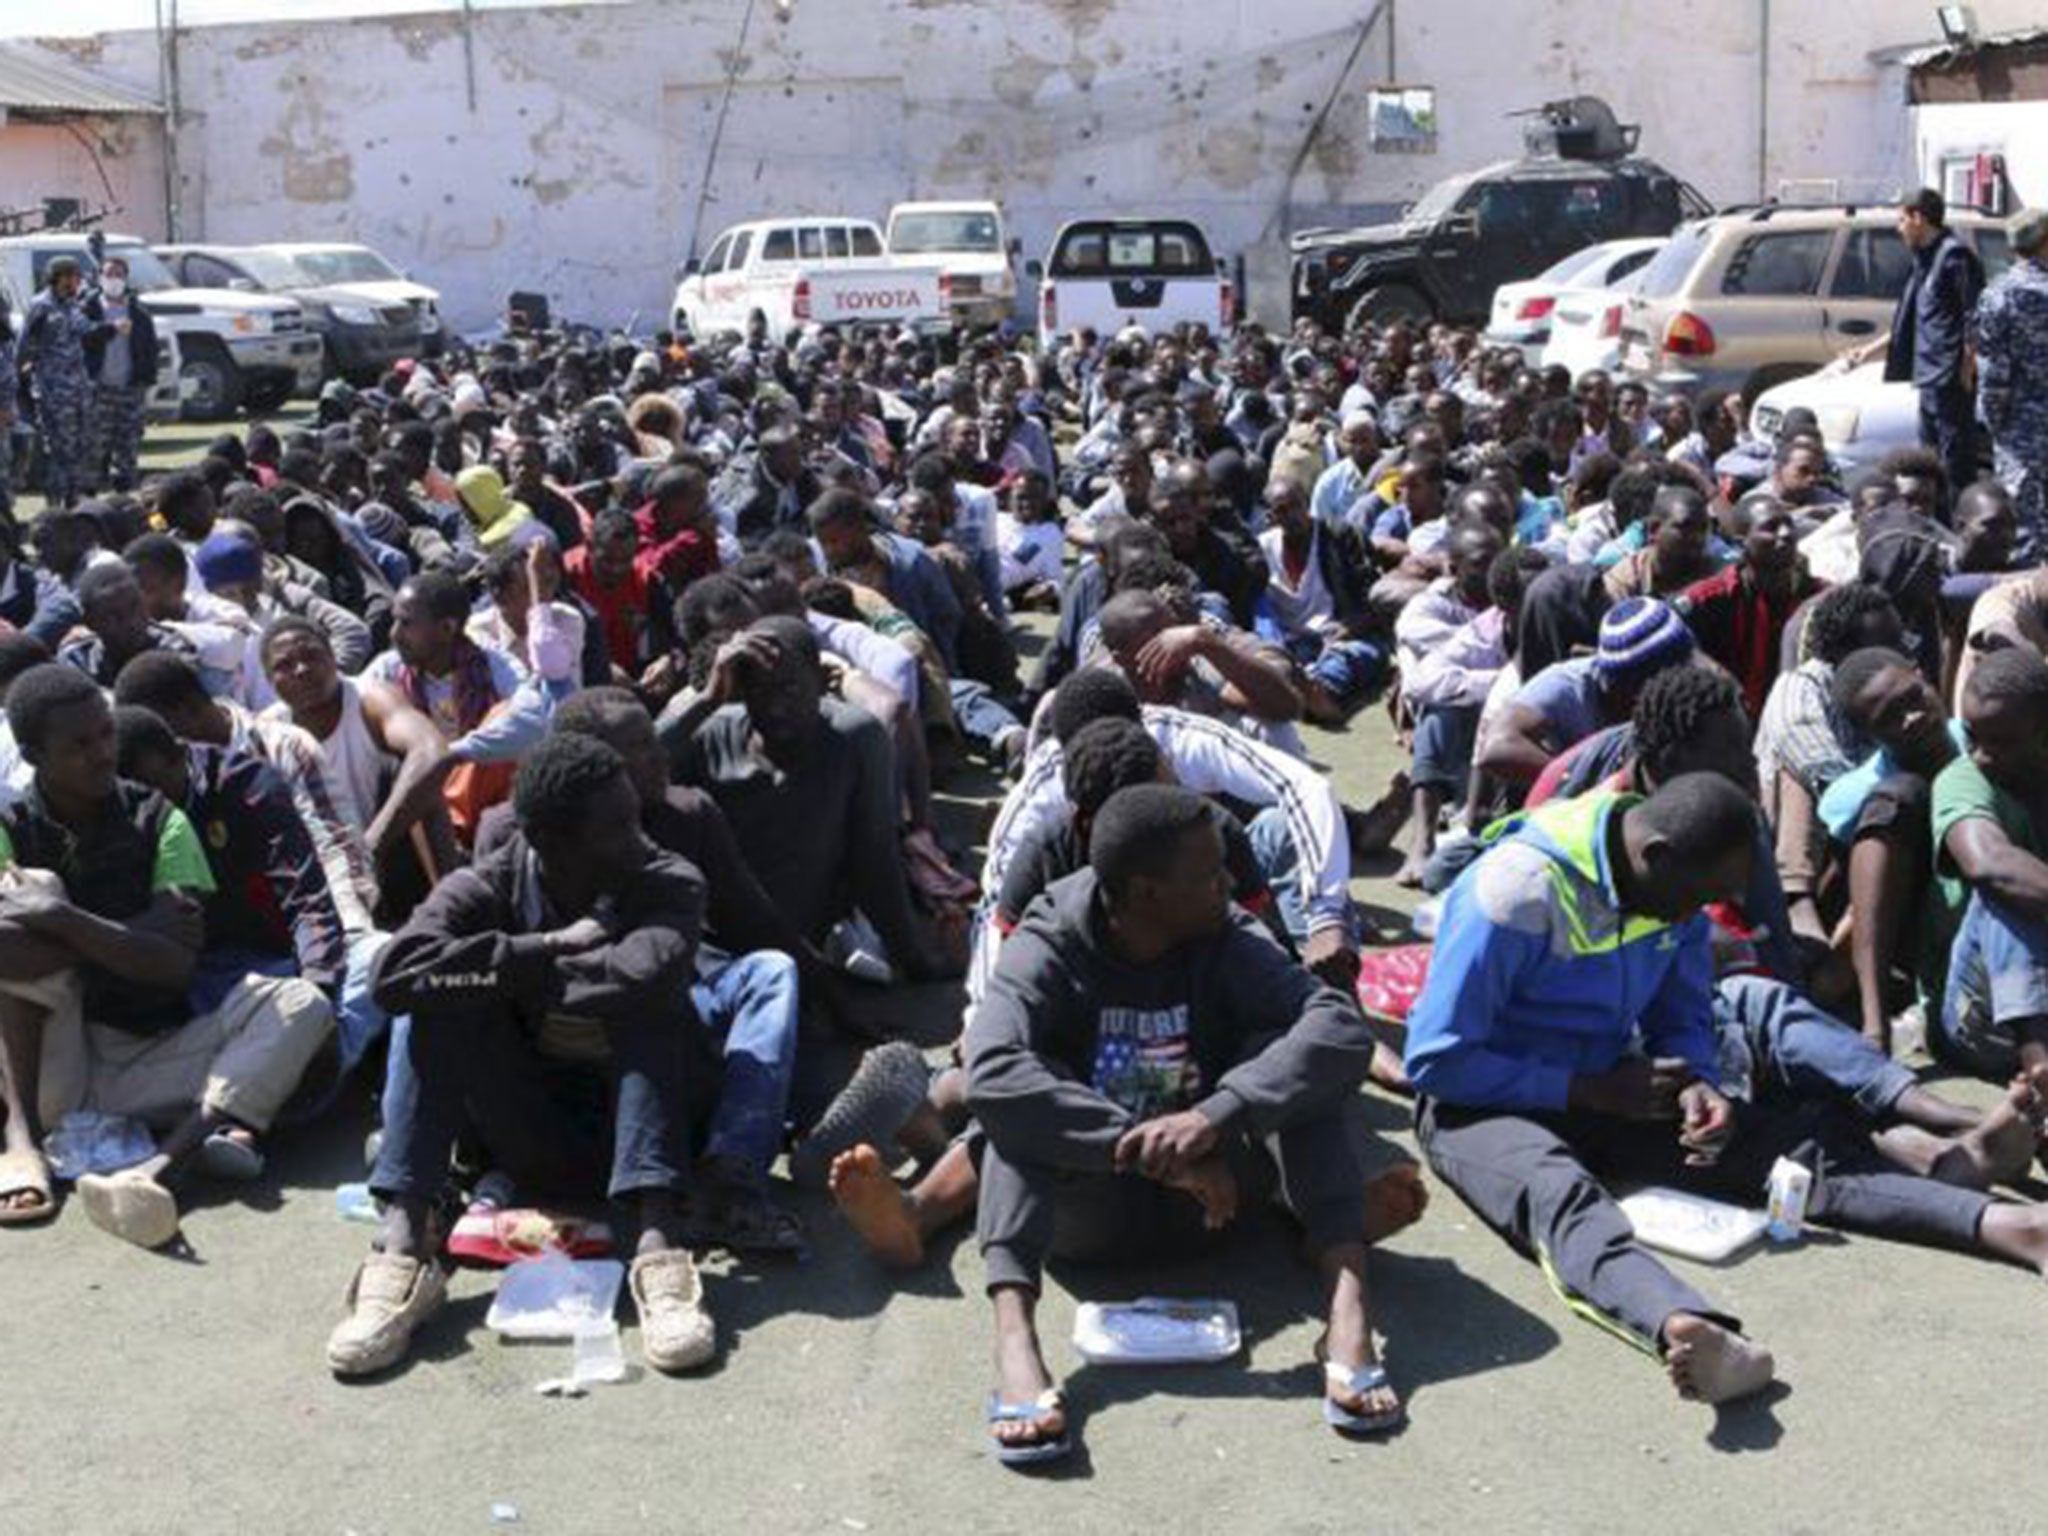 African immigrants arrive in Tripoli after being rescued by the Libyan coastguard. About 115 people bound for Europe were saved when their boat sank in Libyan waters on 5 May